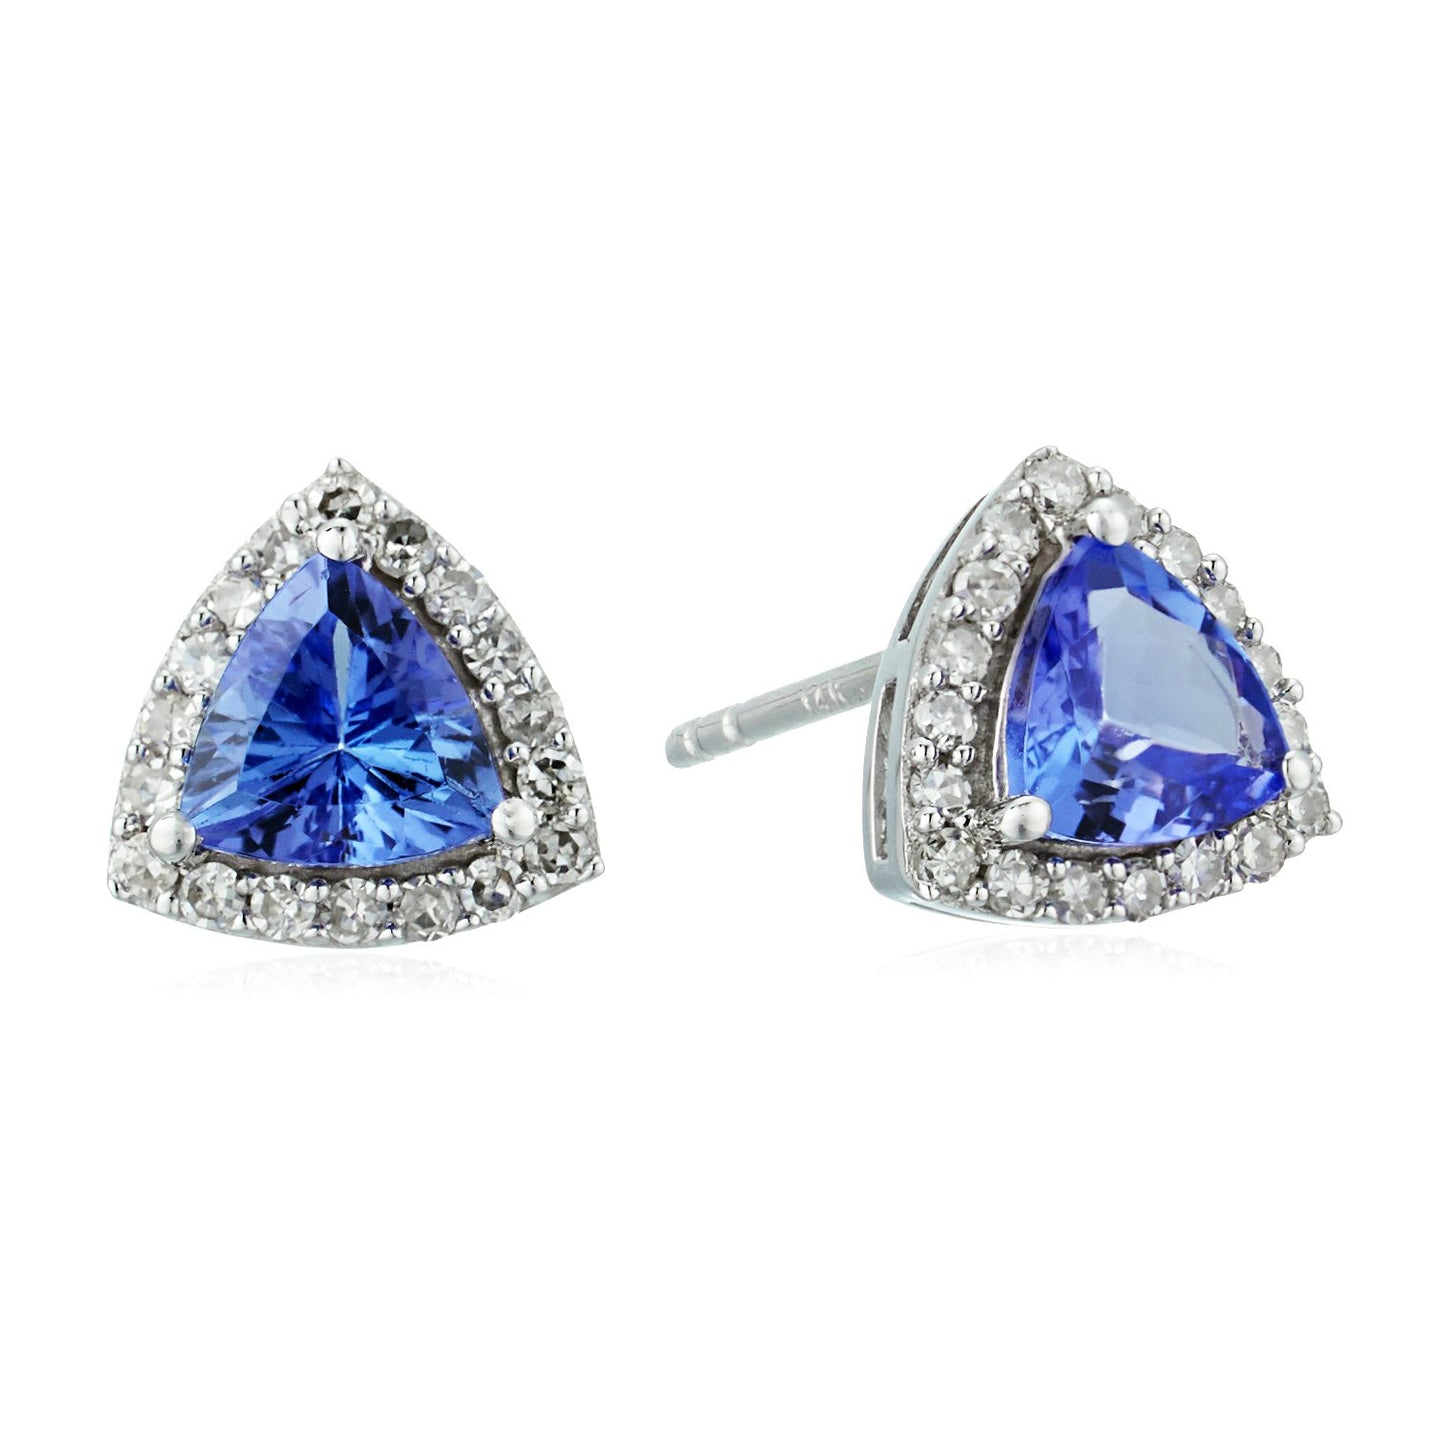 14k White Gold 3/4 cttw Trillion Tanzanite and Diamond Halo Stud Earrings (1/8 cttw, I-J Color, Clarity I2-I3) - pinctore